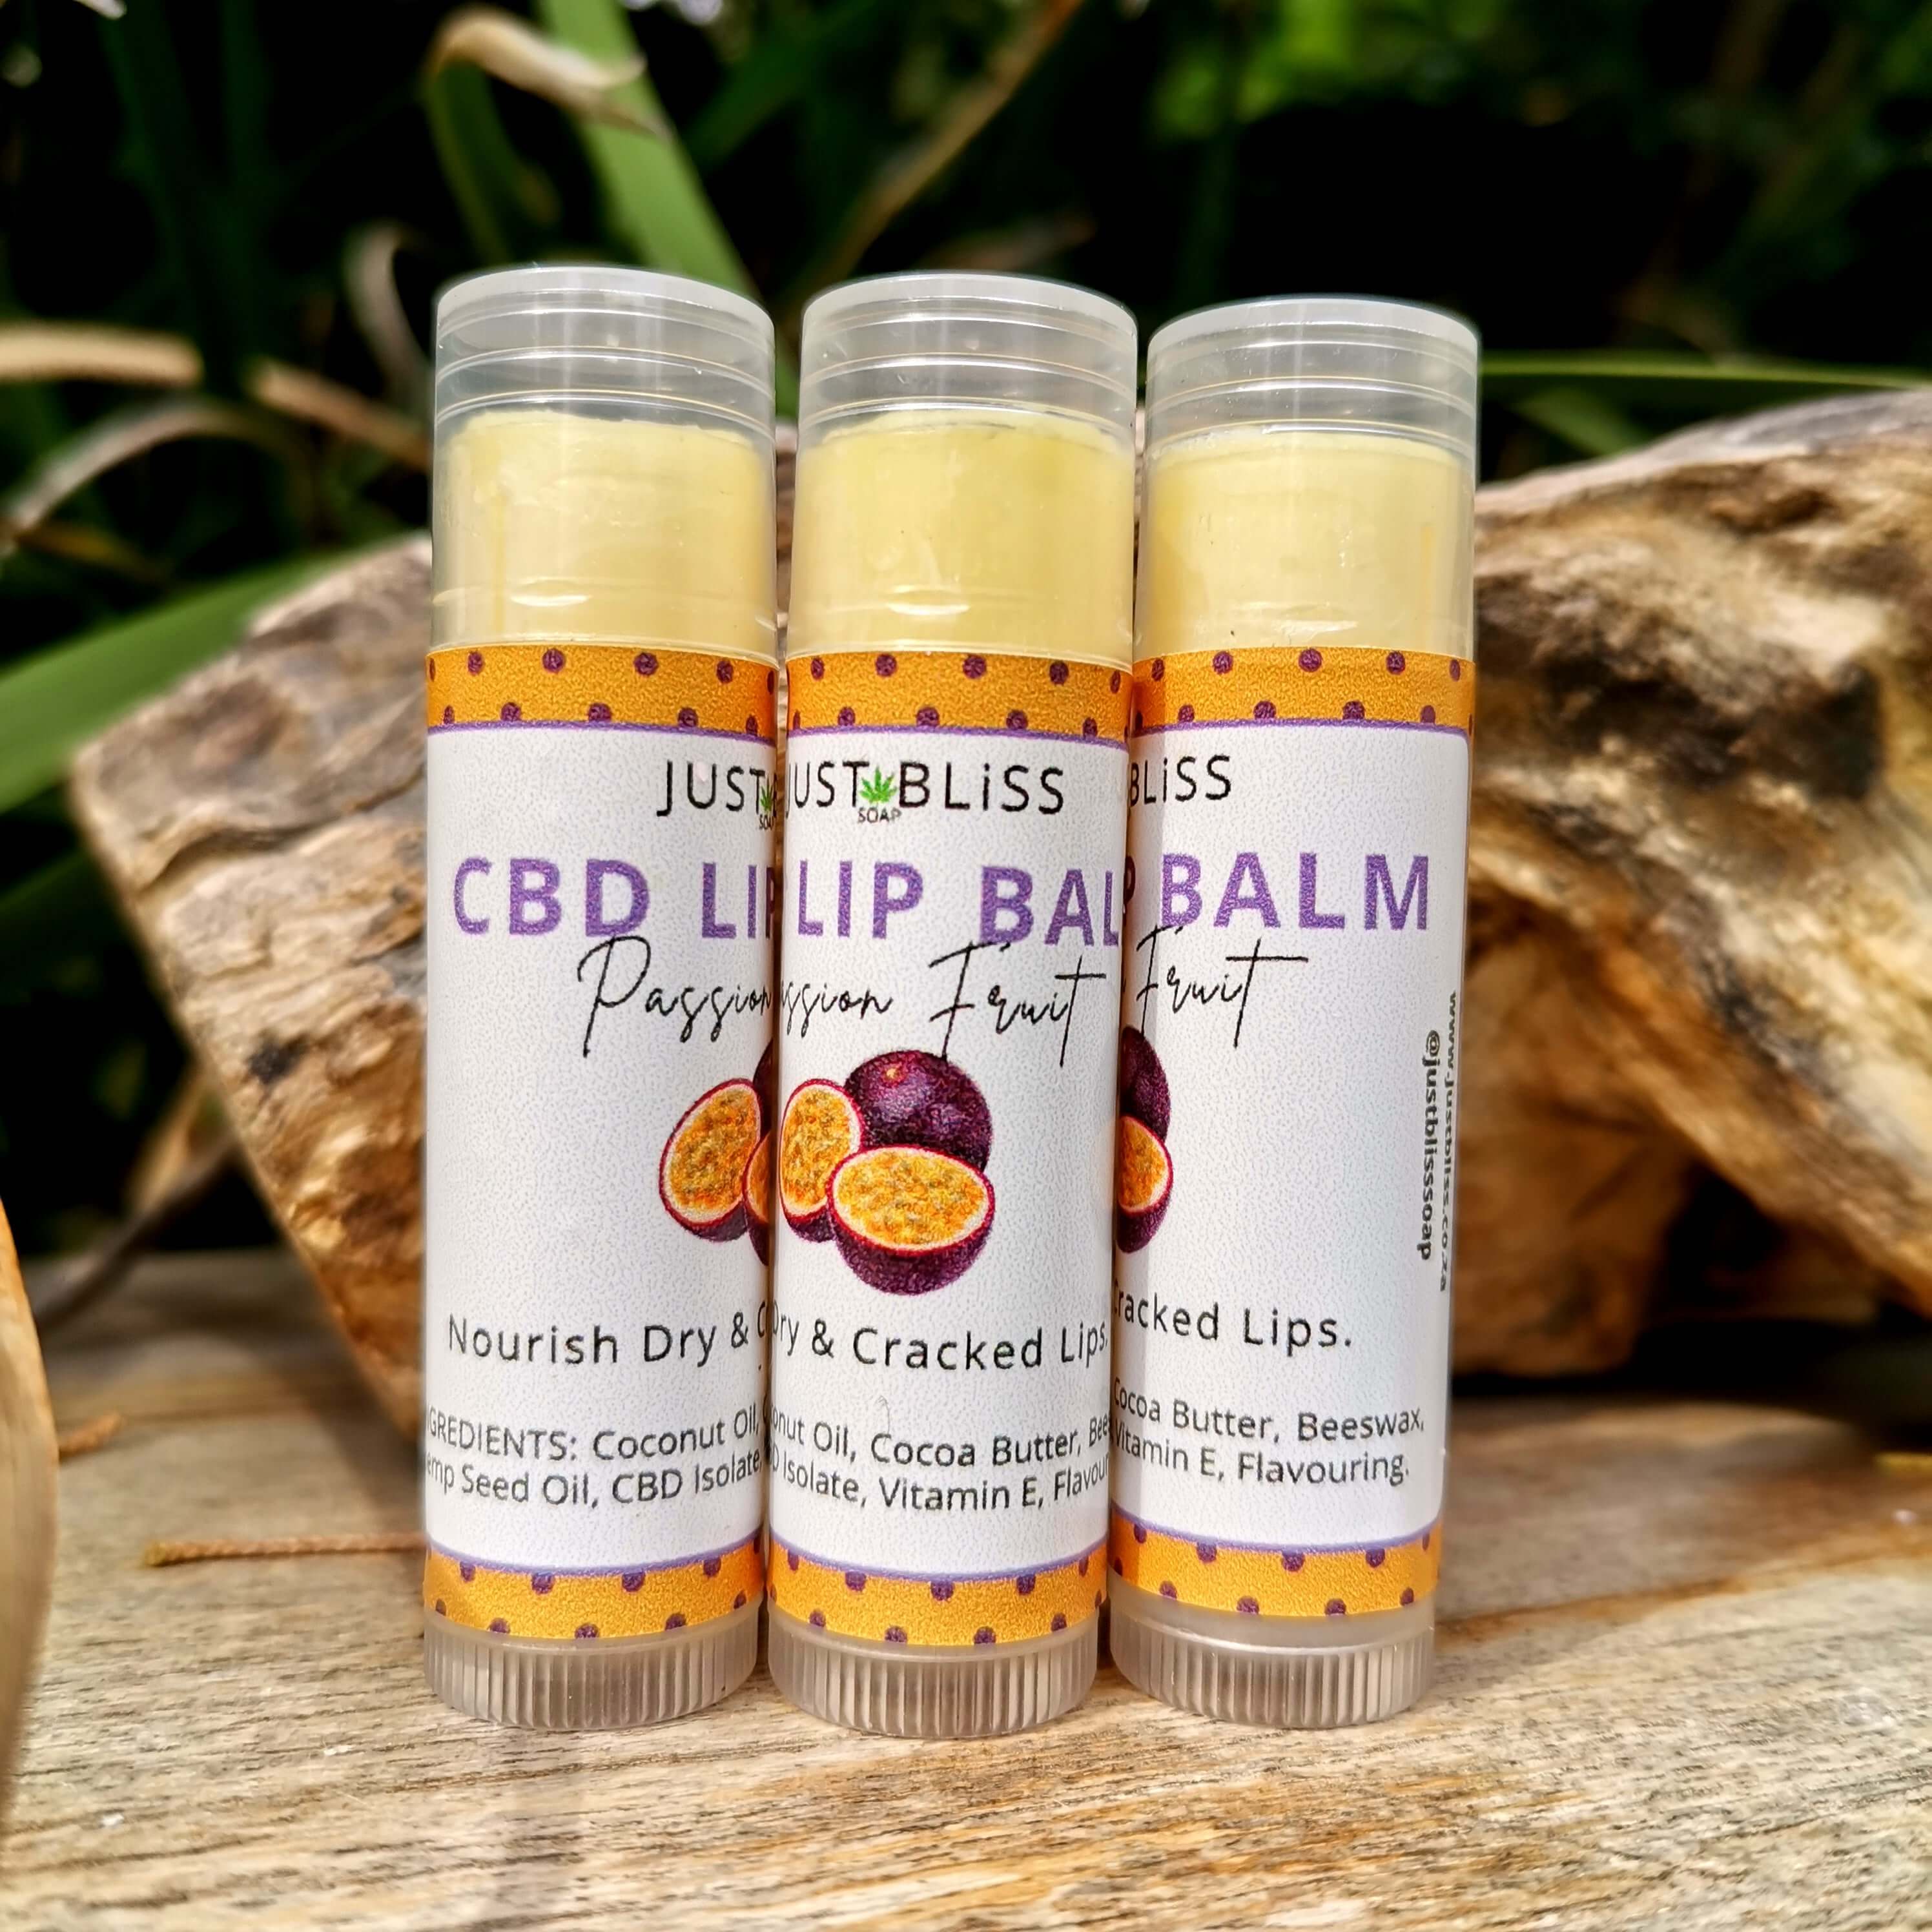 FACIAL OiL: Prickly Pear Oil (30ml), JUSTBLiSS Soap